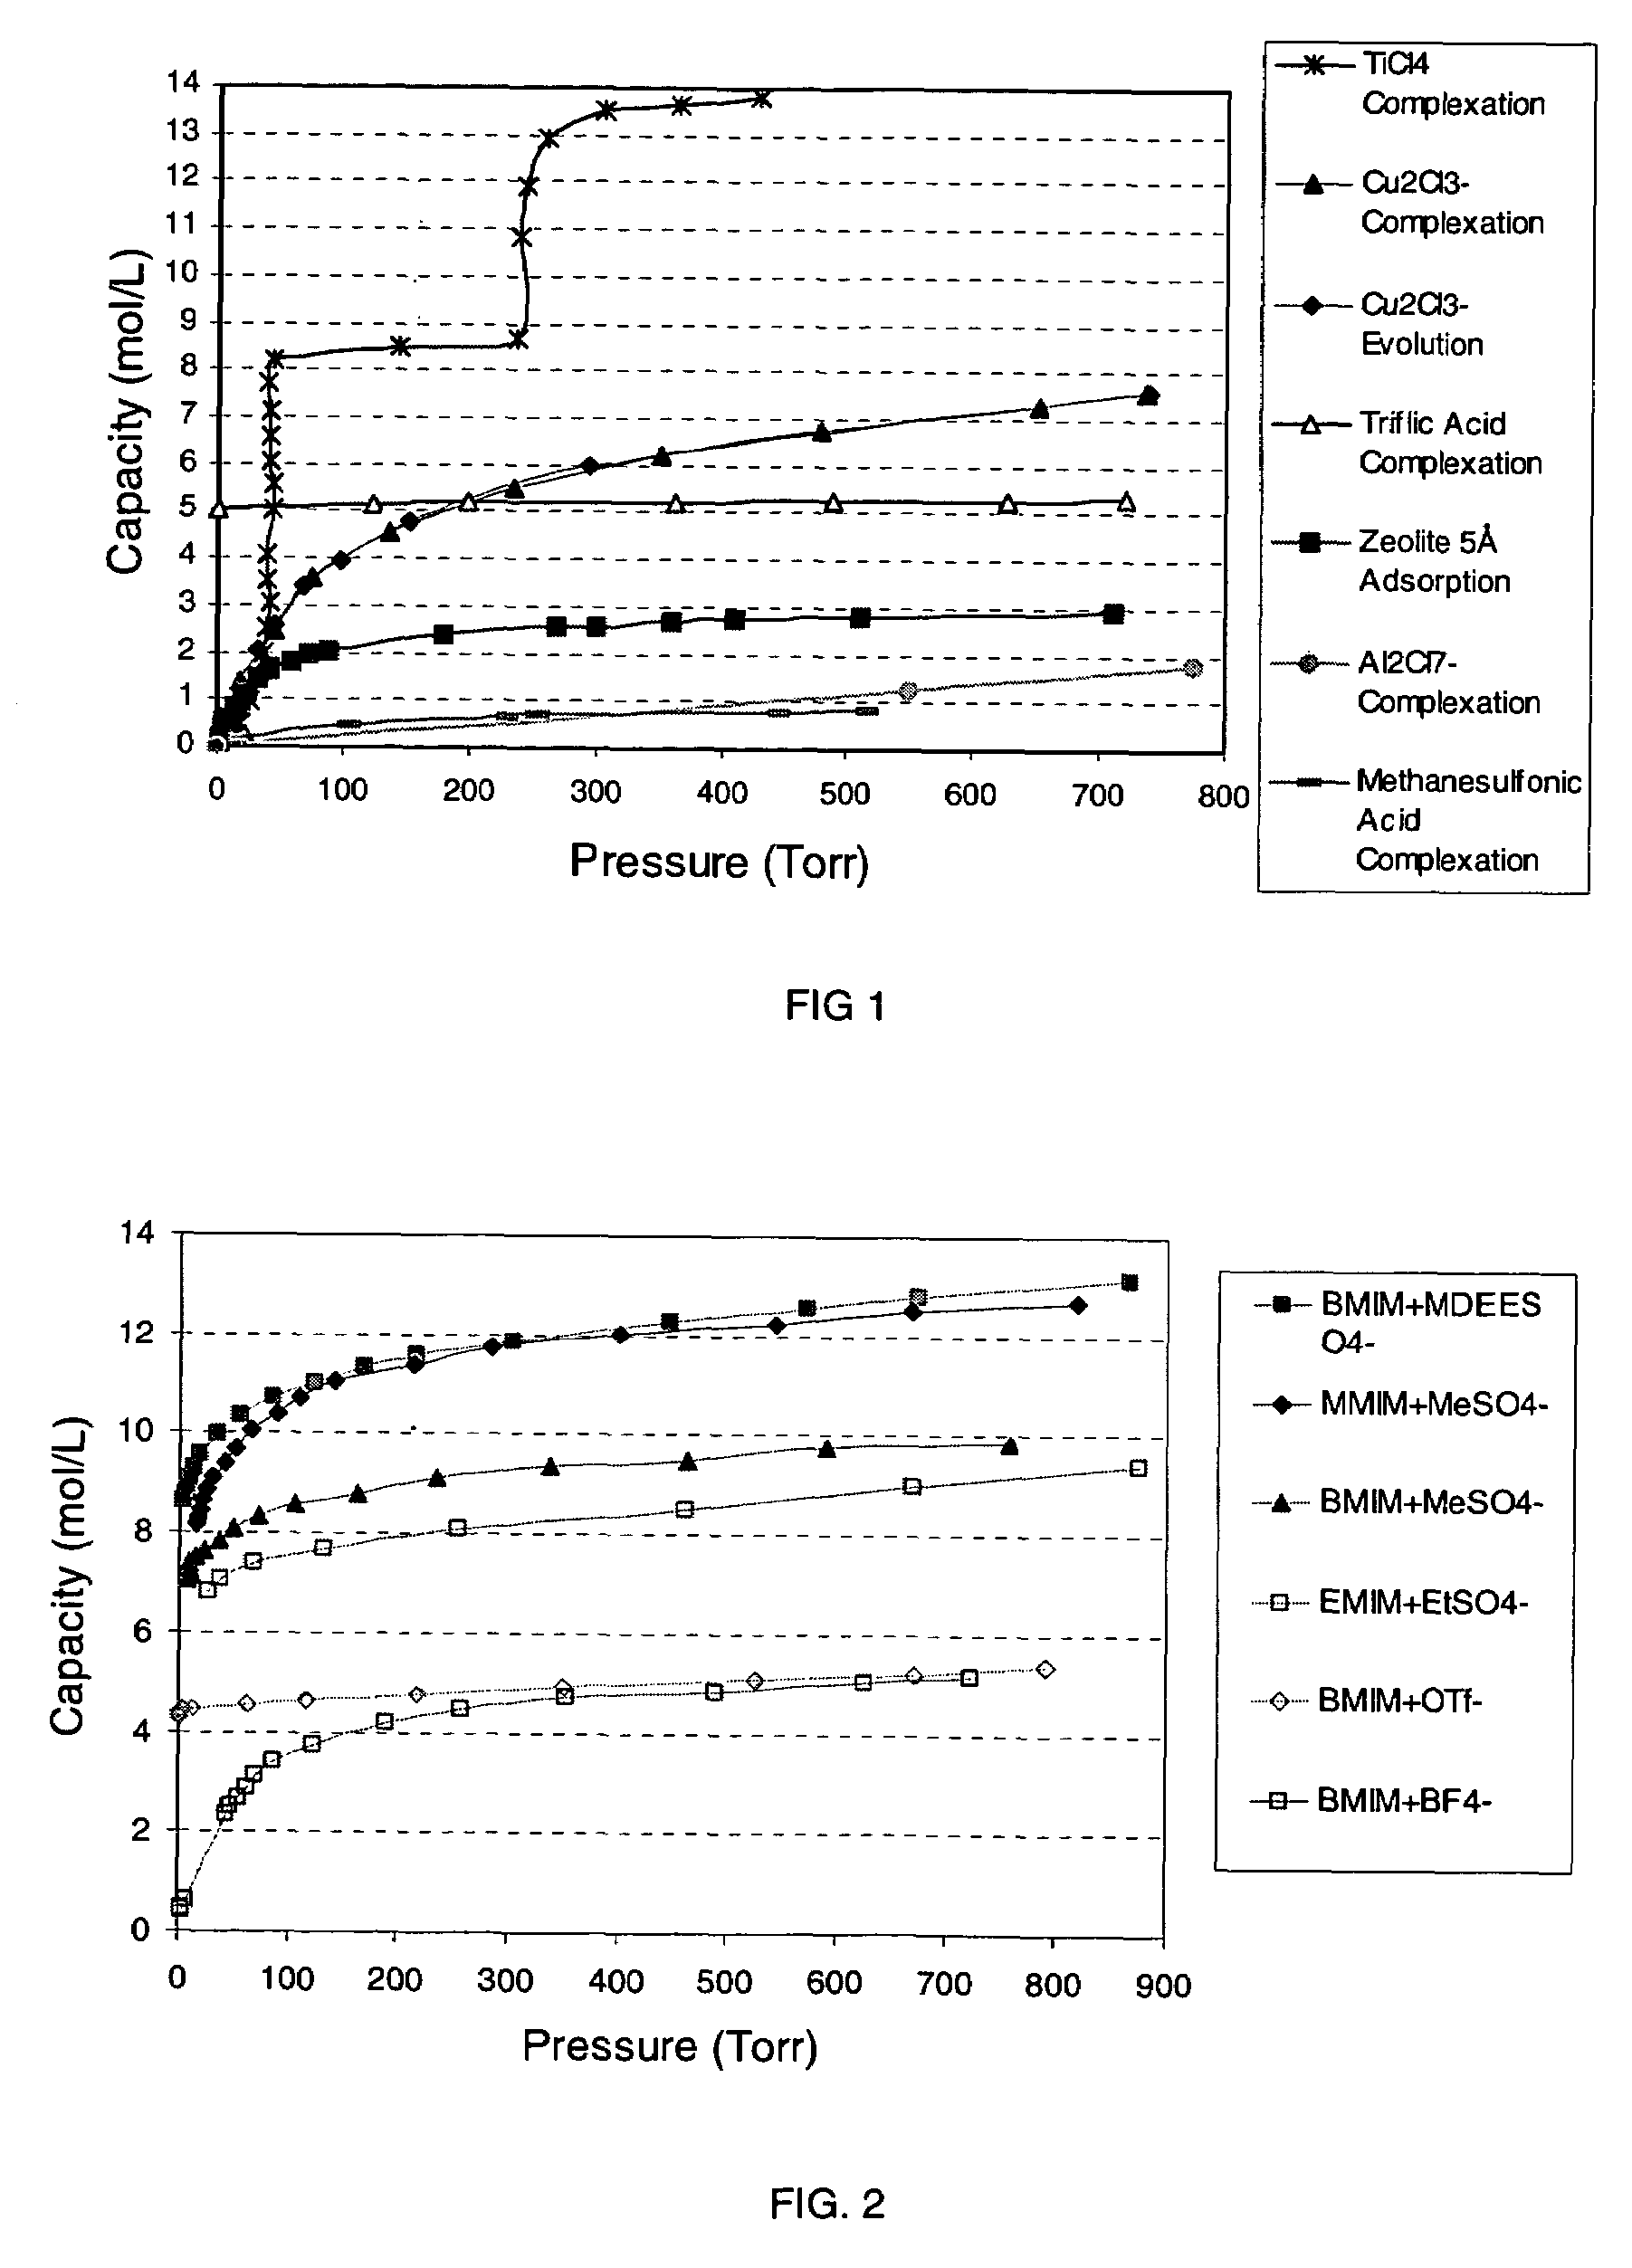 Ionic liquid based mixtures for gas storage and delivery